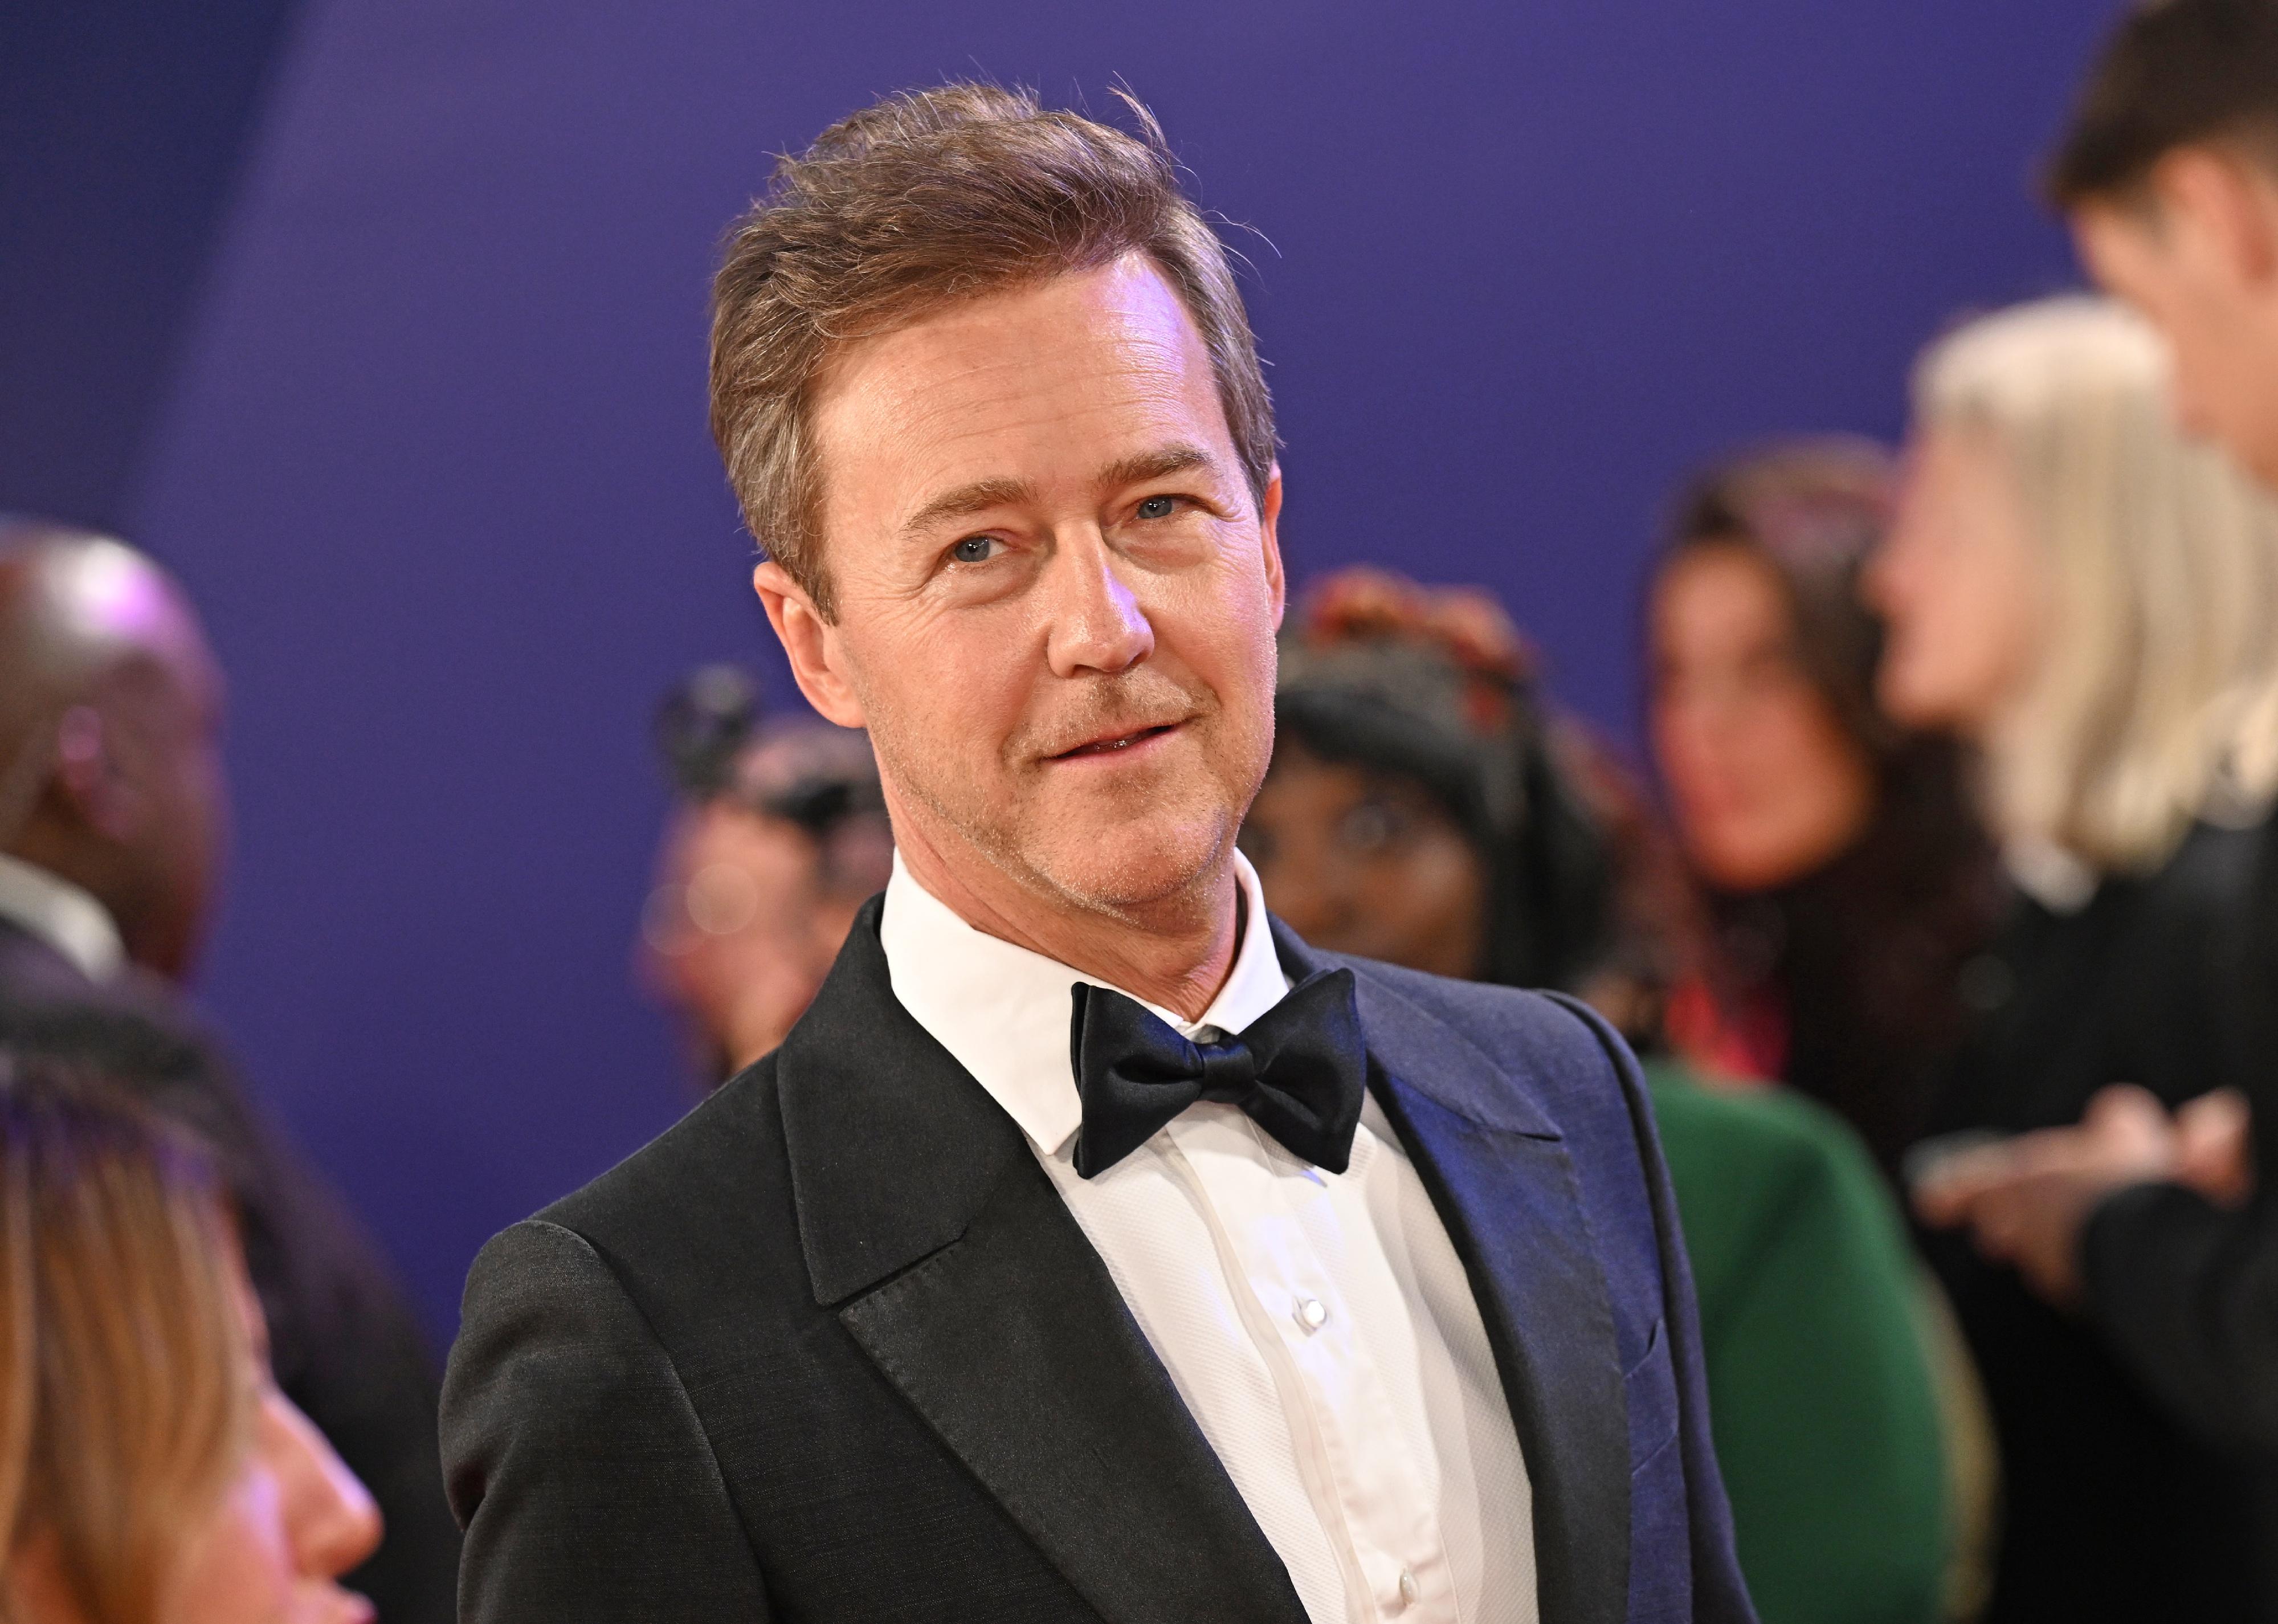 Edward Norton attends the 